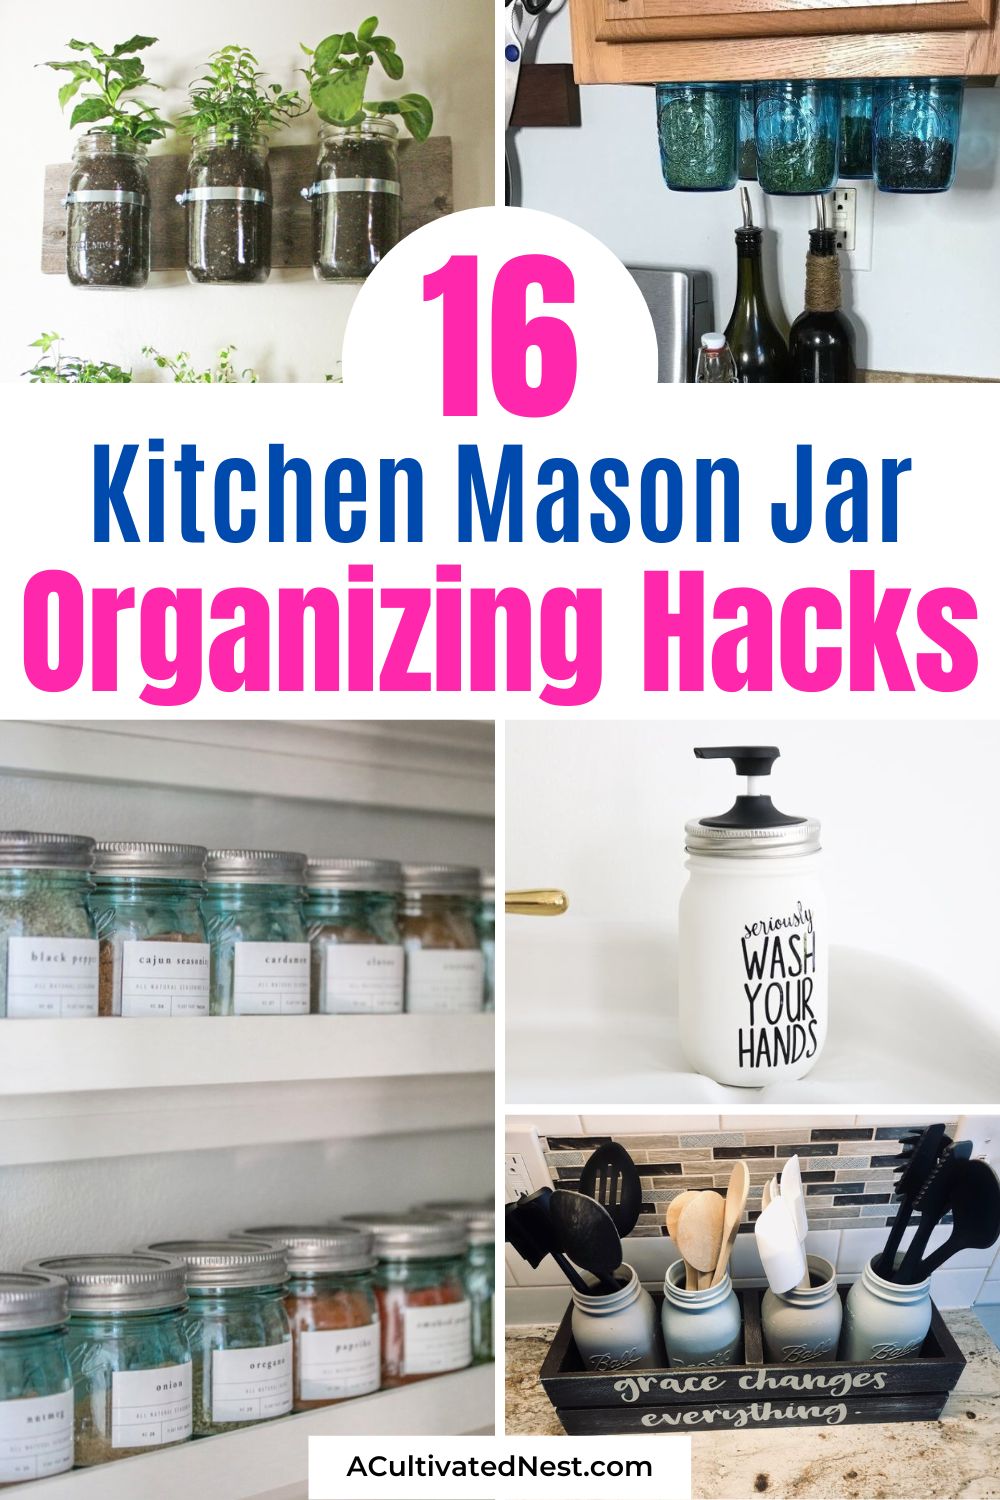 16 Genius Kitchen Mason Jar Organization Hacks- Say goodbye to kitchen chaos and hello to harmony with these genius Mason jar organization hacks! Transform your pantry, counters, and cabinets with simple yet innovative ways to use Mason jars for organizing everything from dry goods to homemade cleaning supplies. | #MasonJarIdeas #KitchenOrganization #HomeHacks #organizingTips #ACultivatedNest